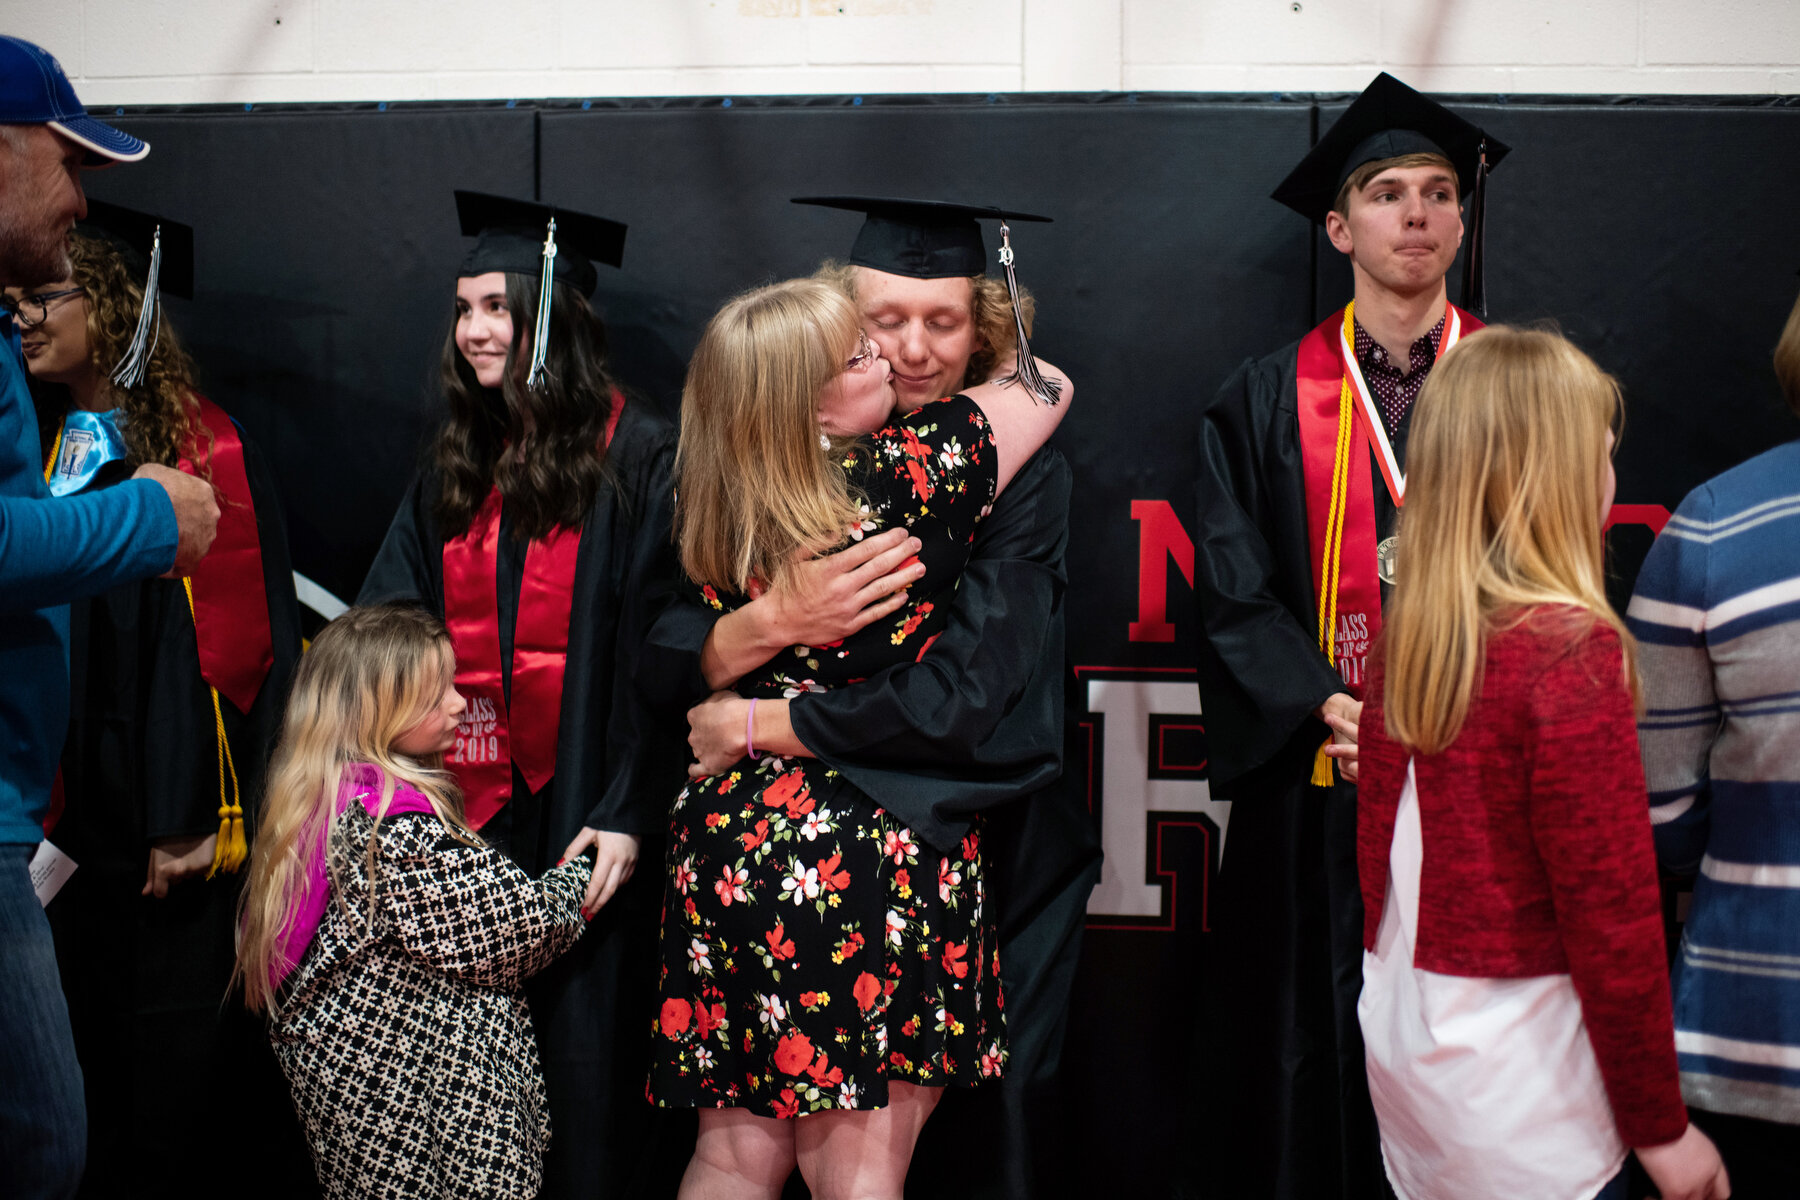  Graduates wait in a reception line as a large number of community members greet them after the Bison High School graduation ceremony in Bison, SD. Out of nine students graduating, two students are foreign students, including one who will have to ret